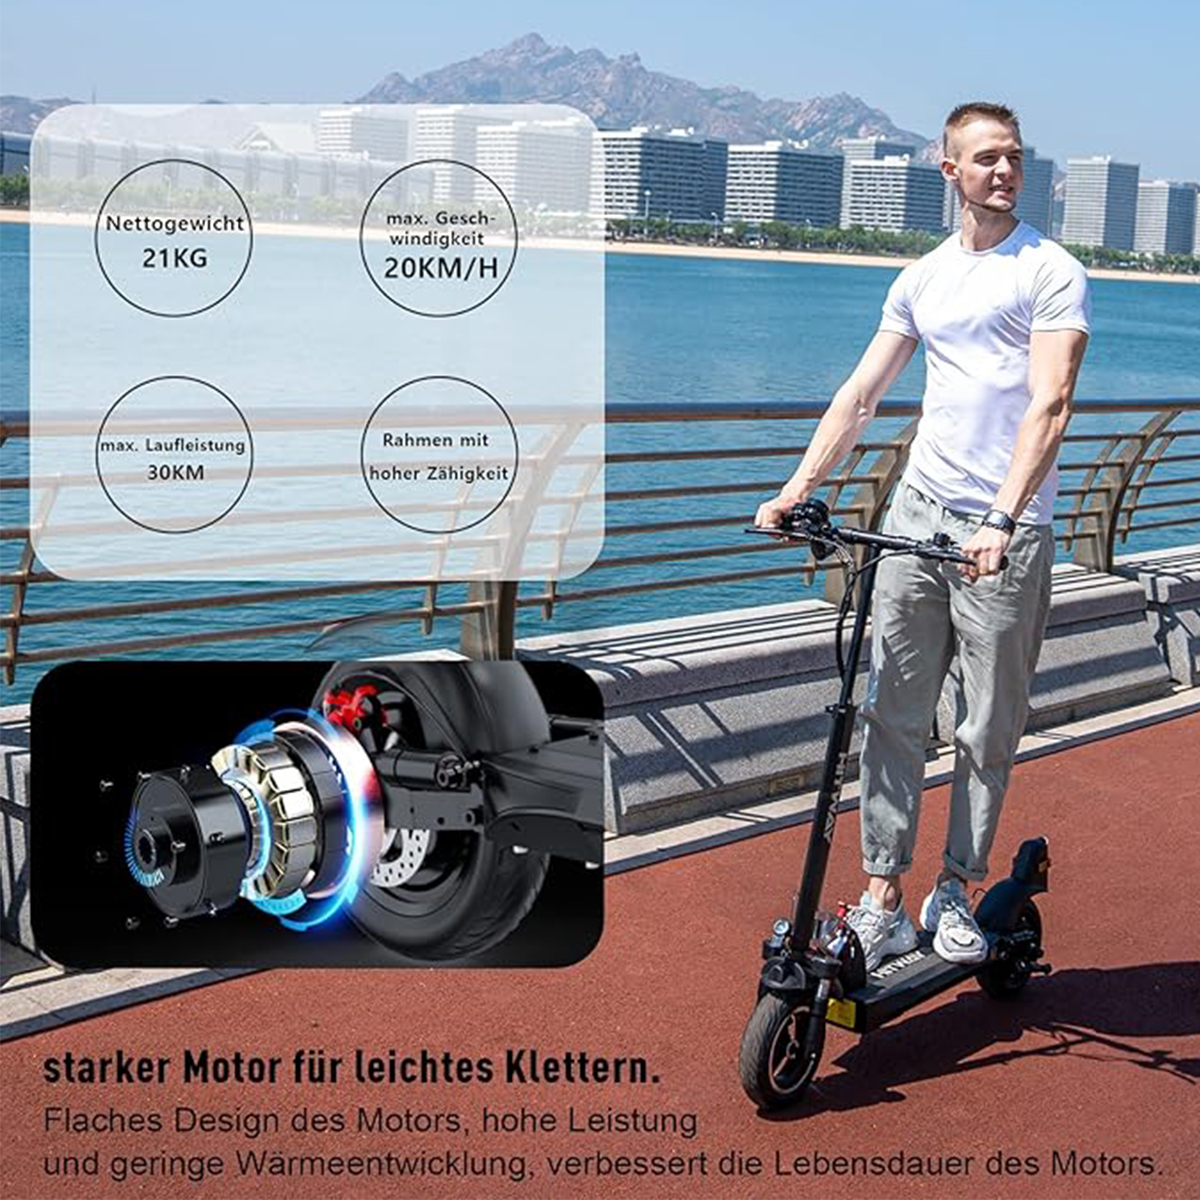 HITWAY H5 Electric Scooter Straßenzulassung Zoll, ABE (10 E-Scooter Scooter mit E schwarz)